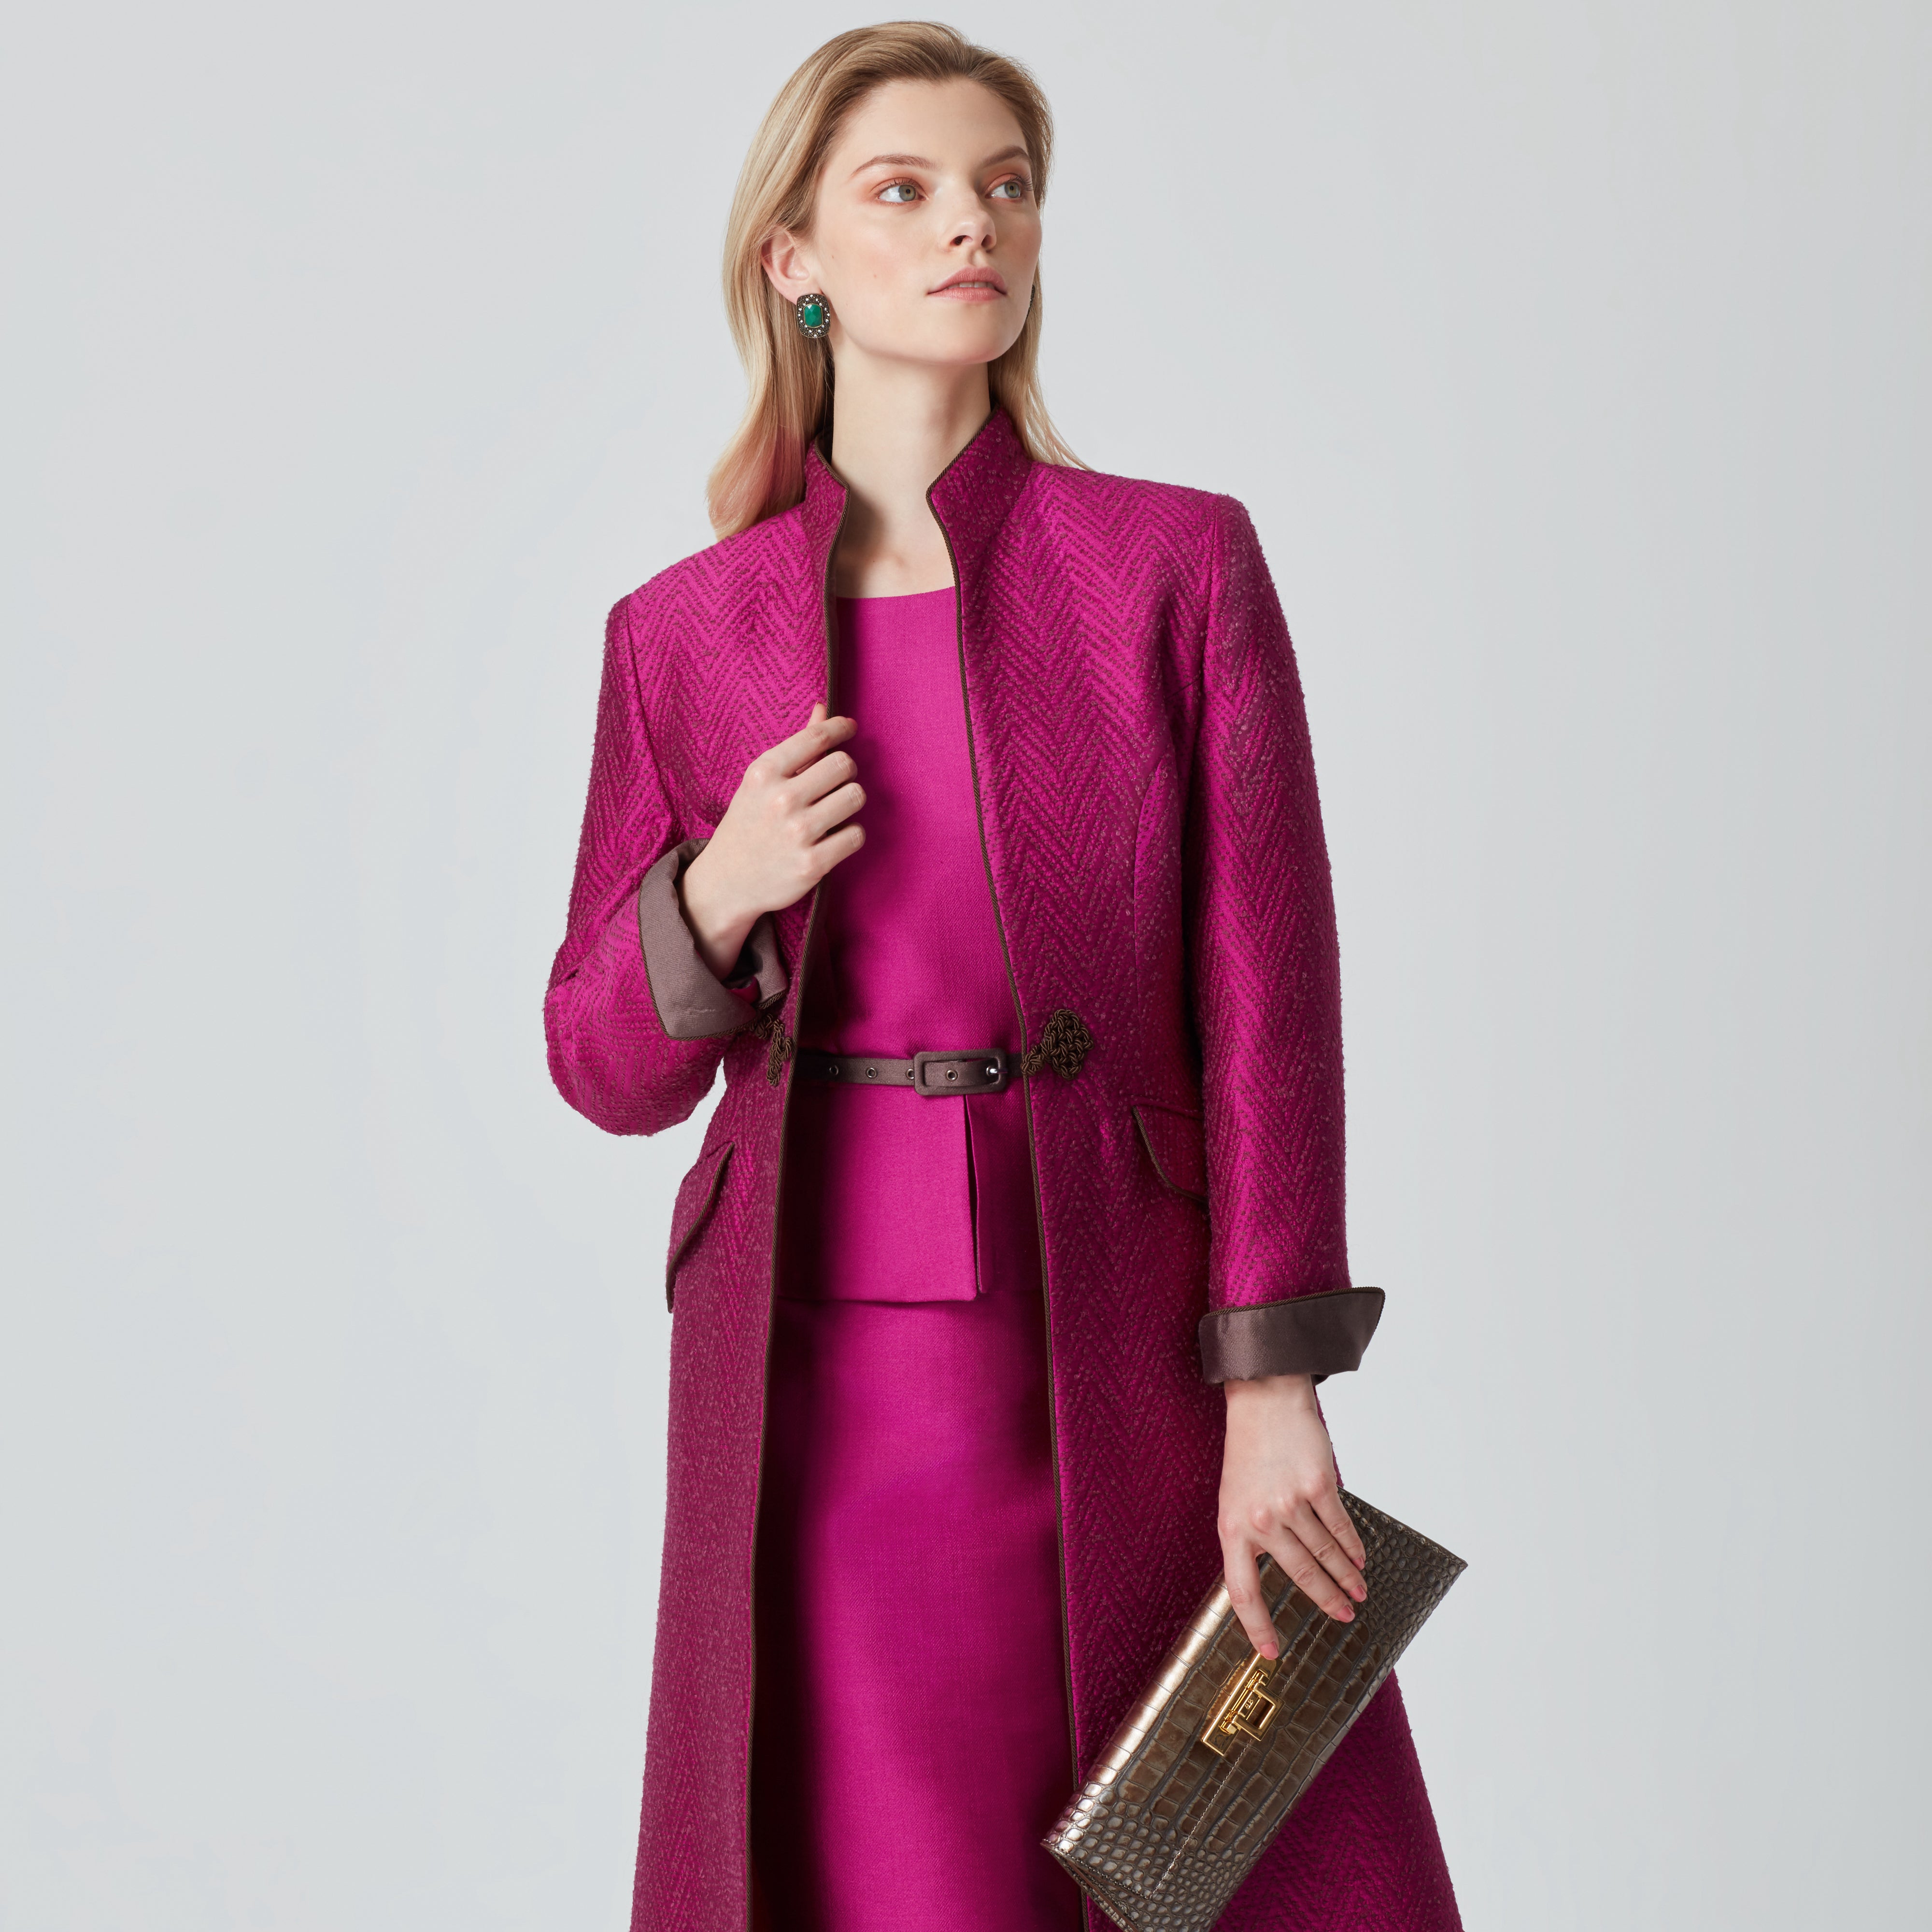 Midi lenght silk dress coat in fuschia and mocha for mother of the bride